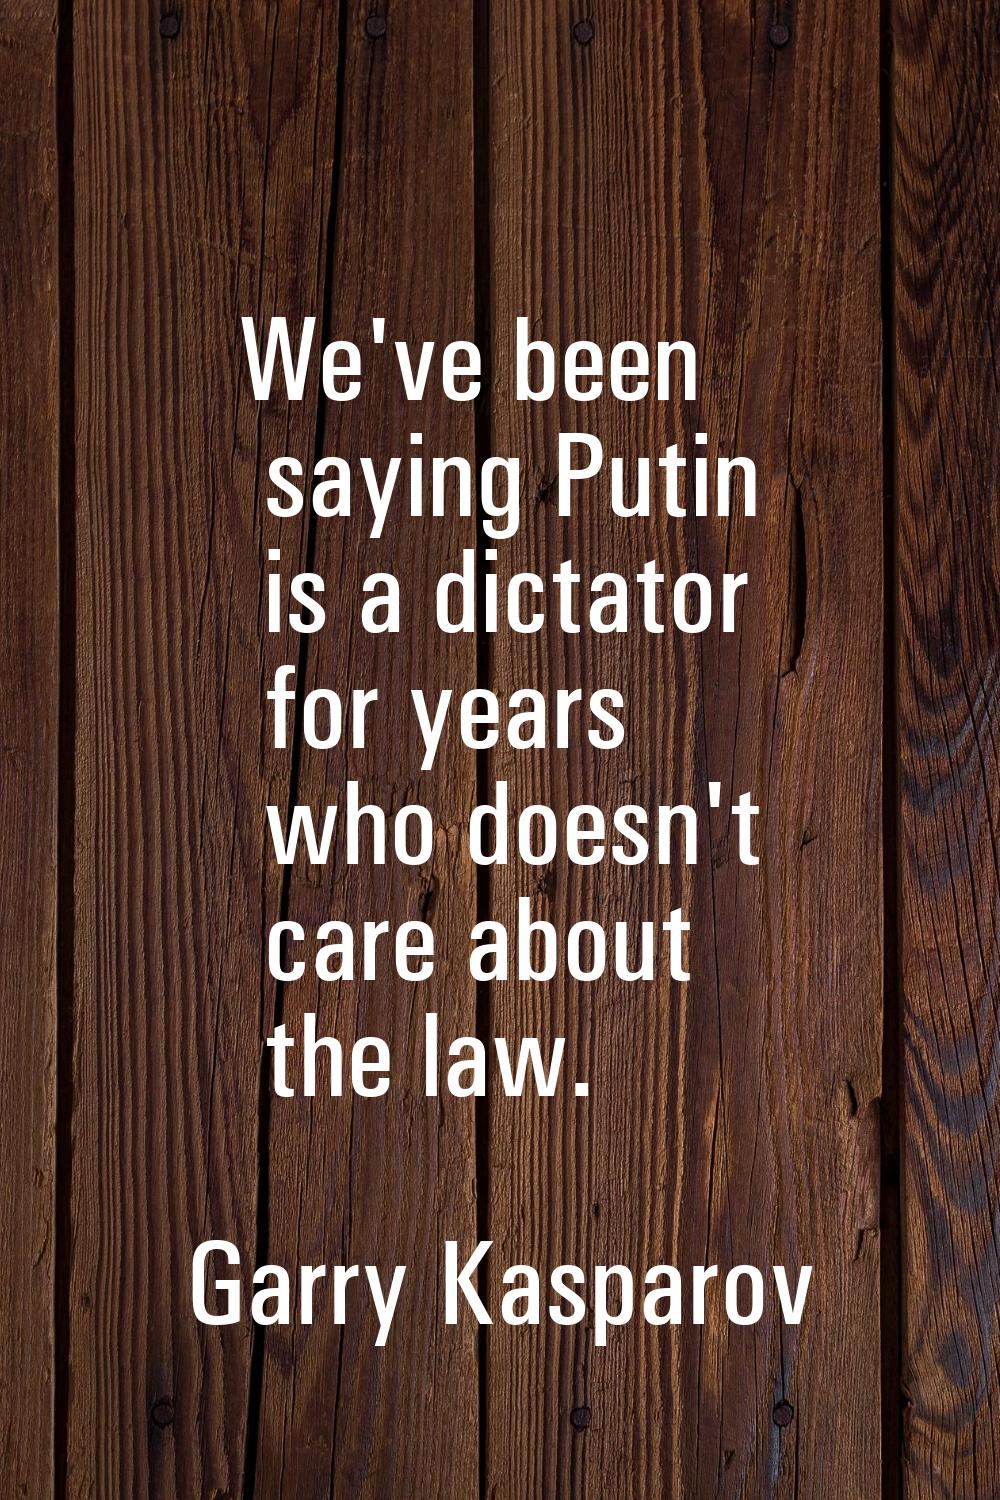 We've been saying Putin is a dictator for years who doesn't care about the law.